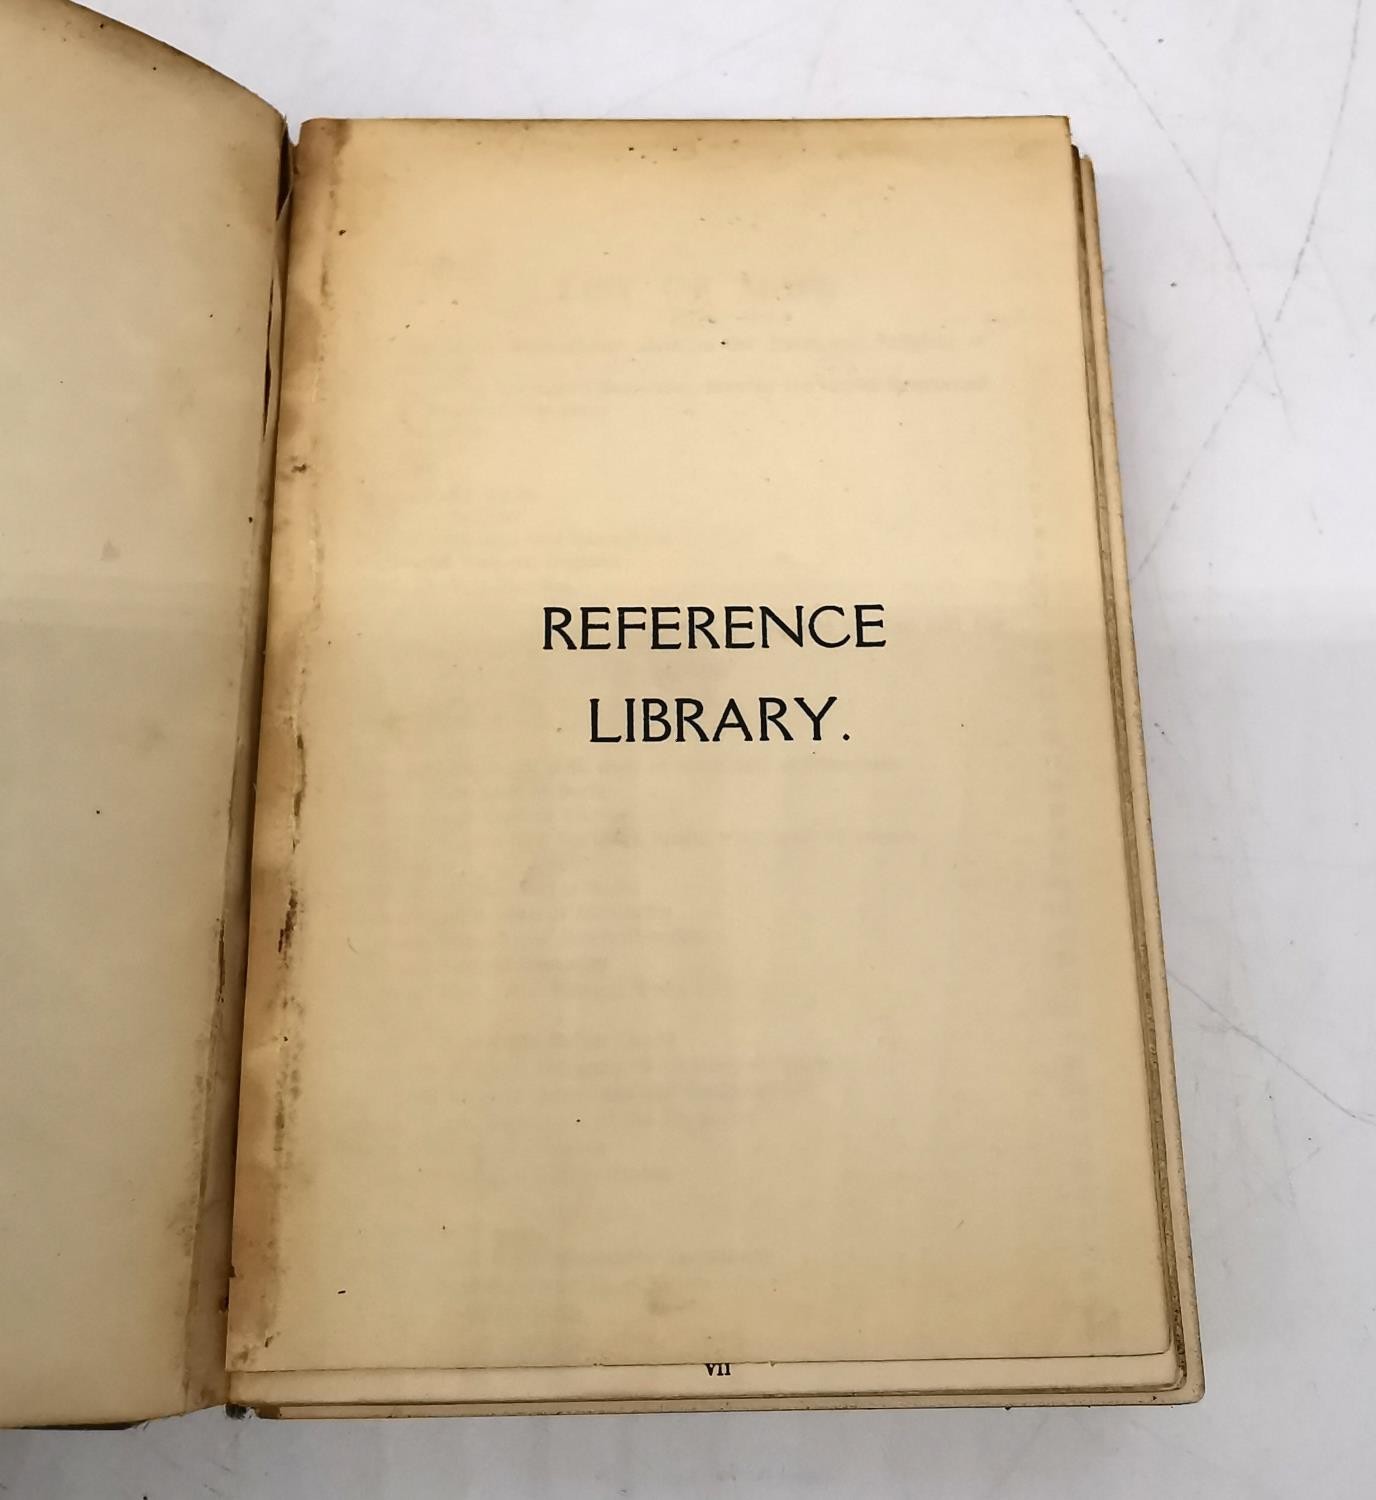 A signed Cartier Ltd. Miniature 'Reference Library' group of Cassell's dictionaries and Philips' - Image 21 of 37